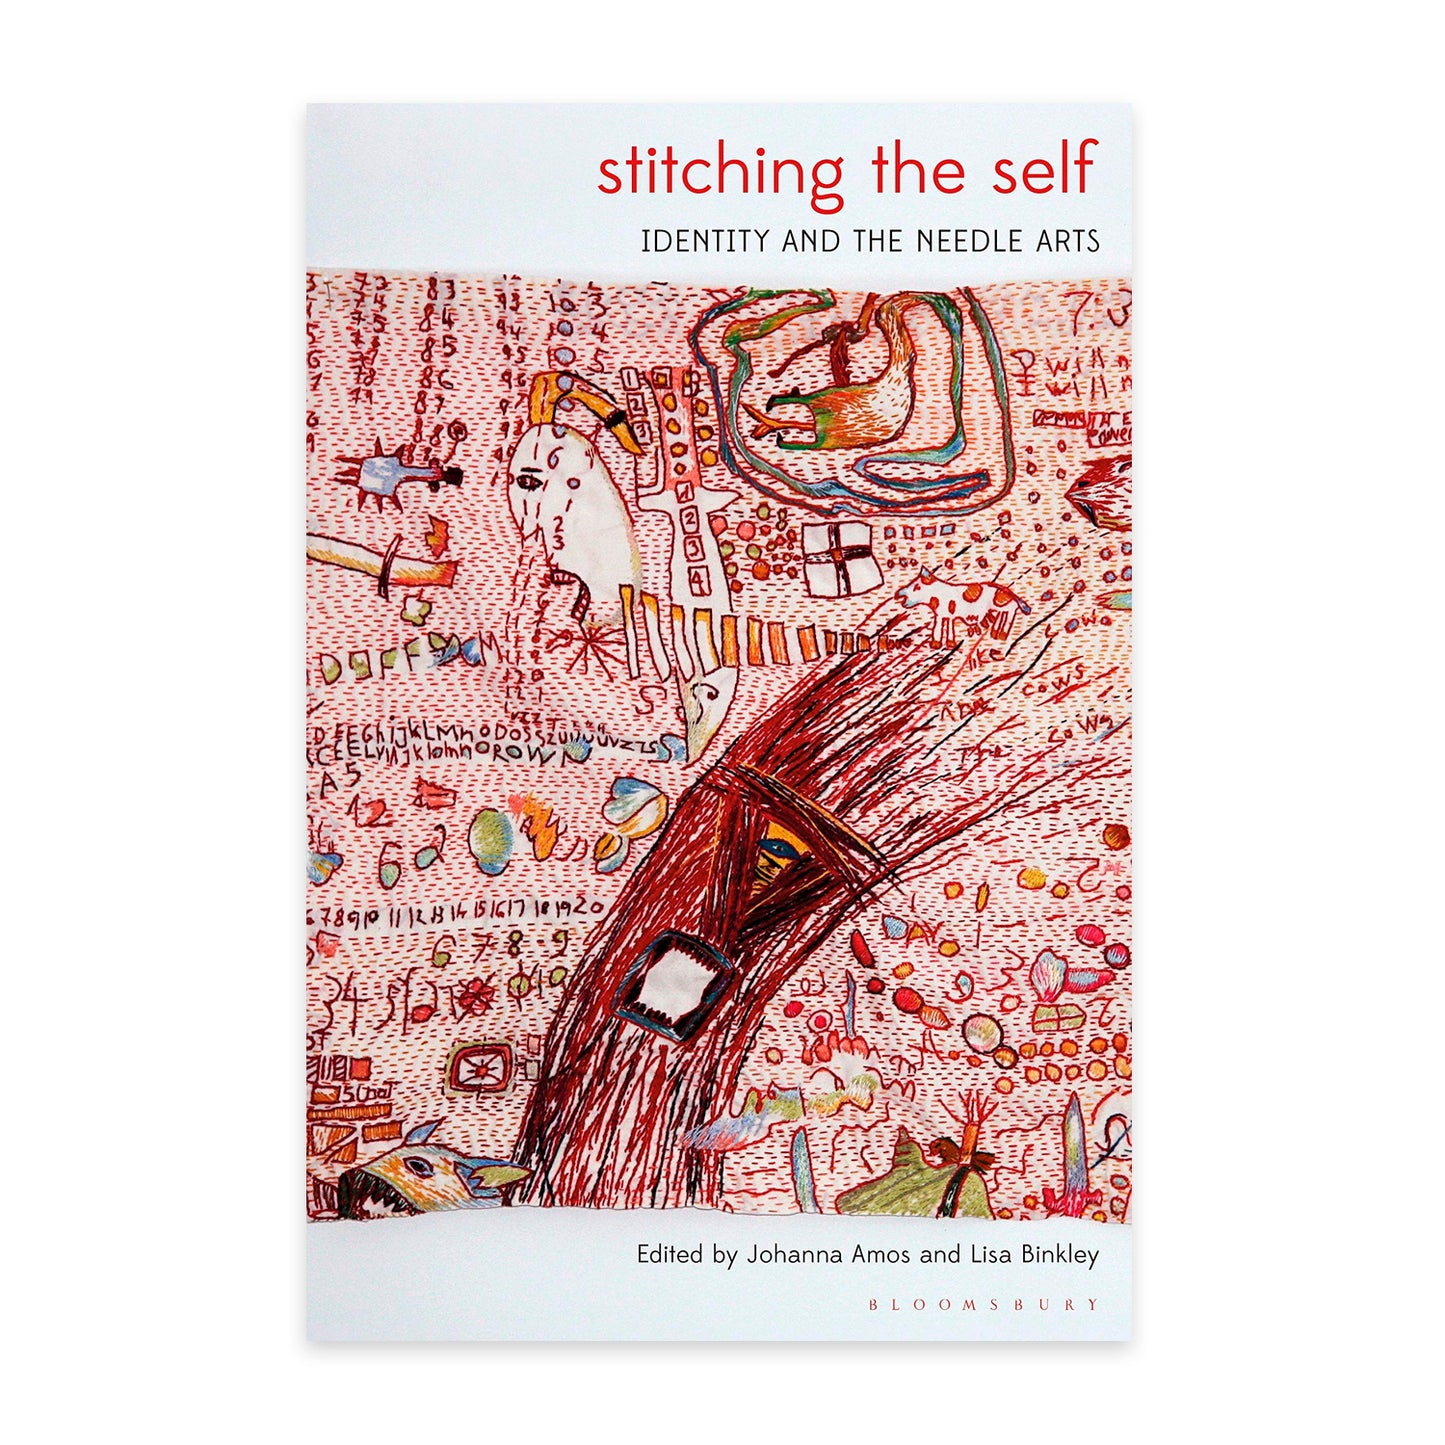 Stitching the Self - Identity and the Needle Arts